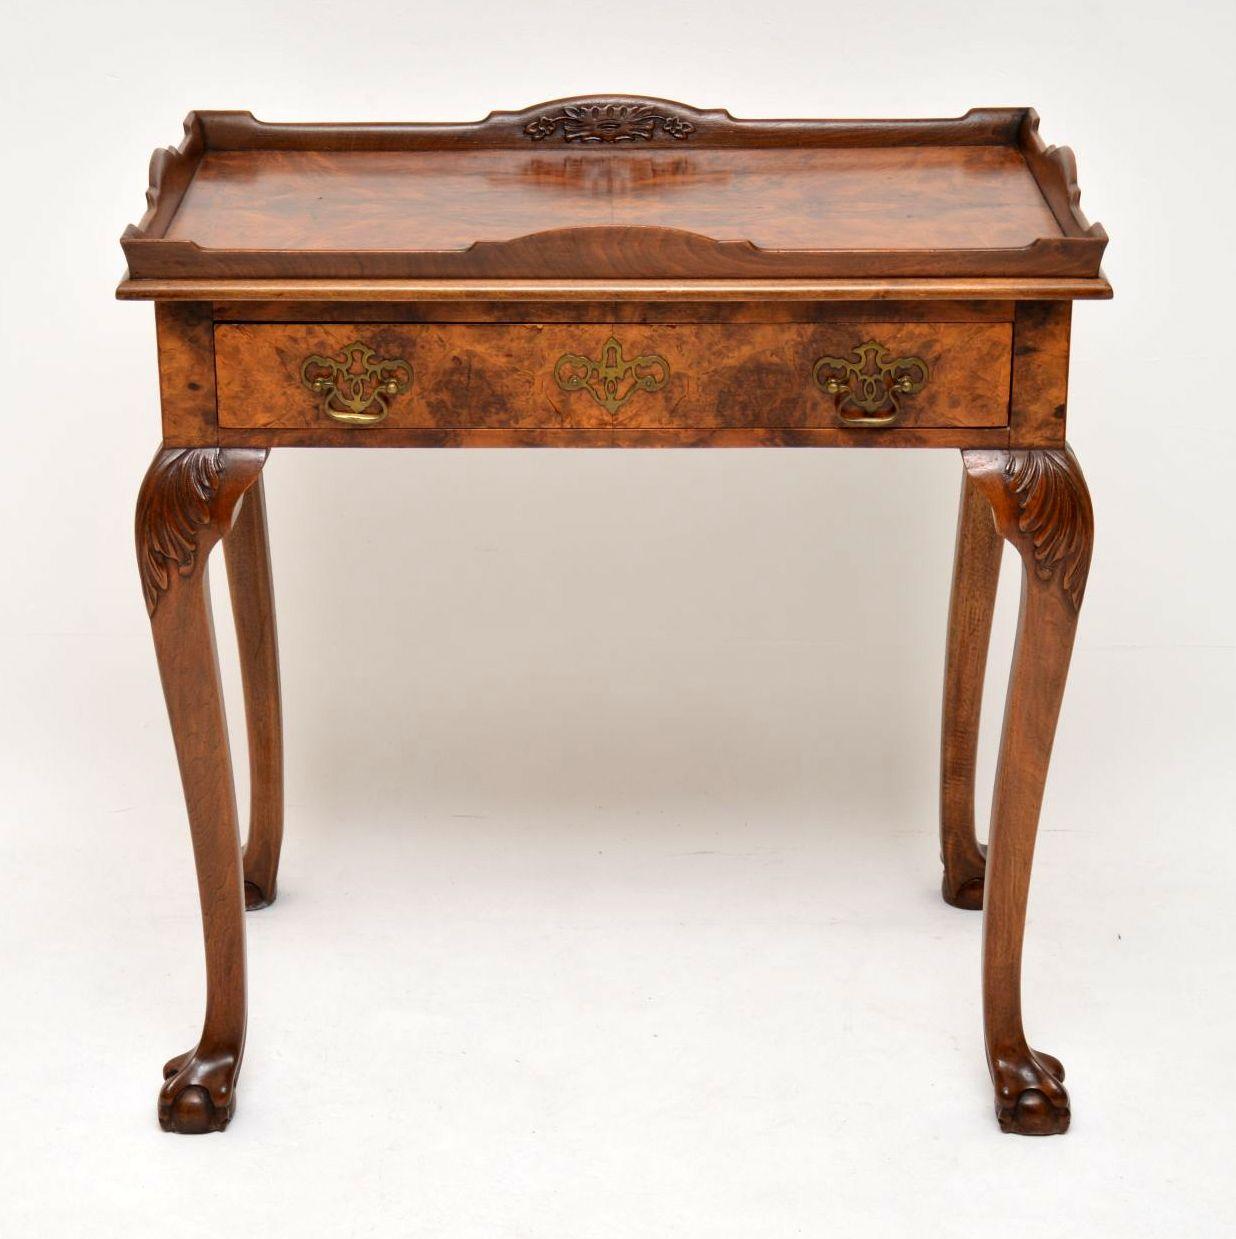 Antique Queen Anne style burr walnut tray top side table dating from the 1920s period and in excellent original condition. The top is burr walnut with shaped tray sides on top which are carved inside. Below this are burr walnut sides, back and